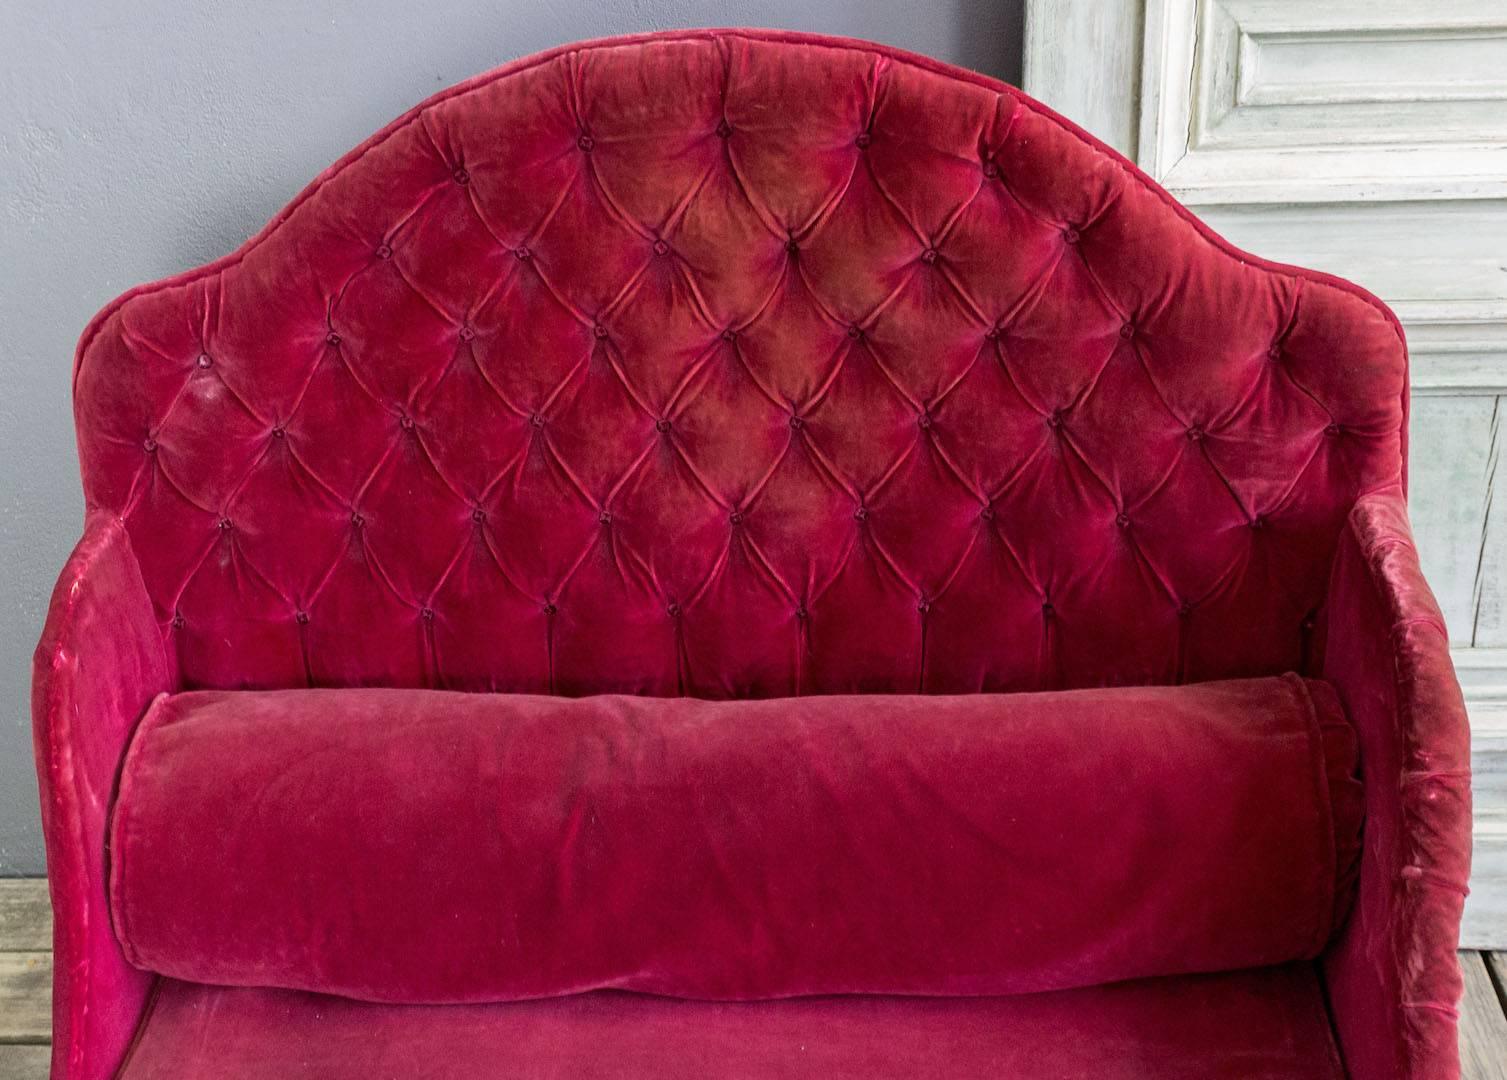 French 19th century iron bed upholstered with tufted red velvet.